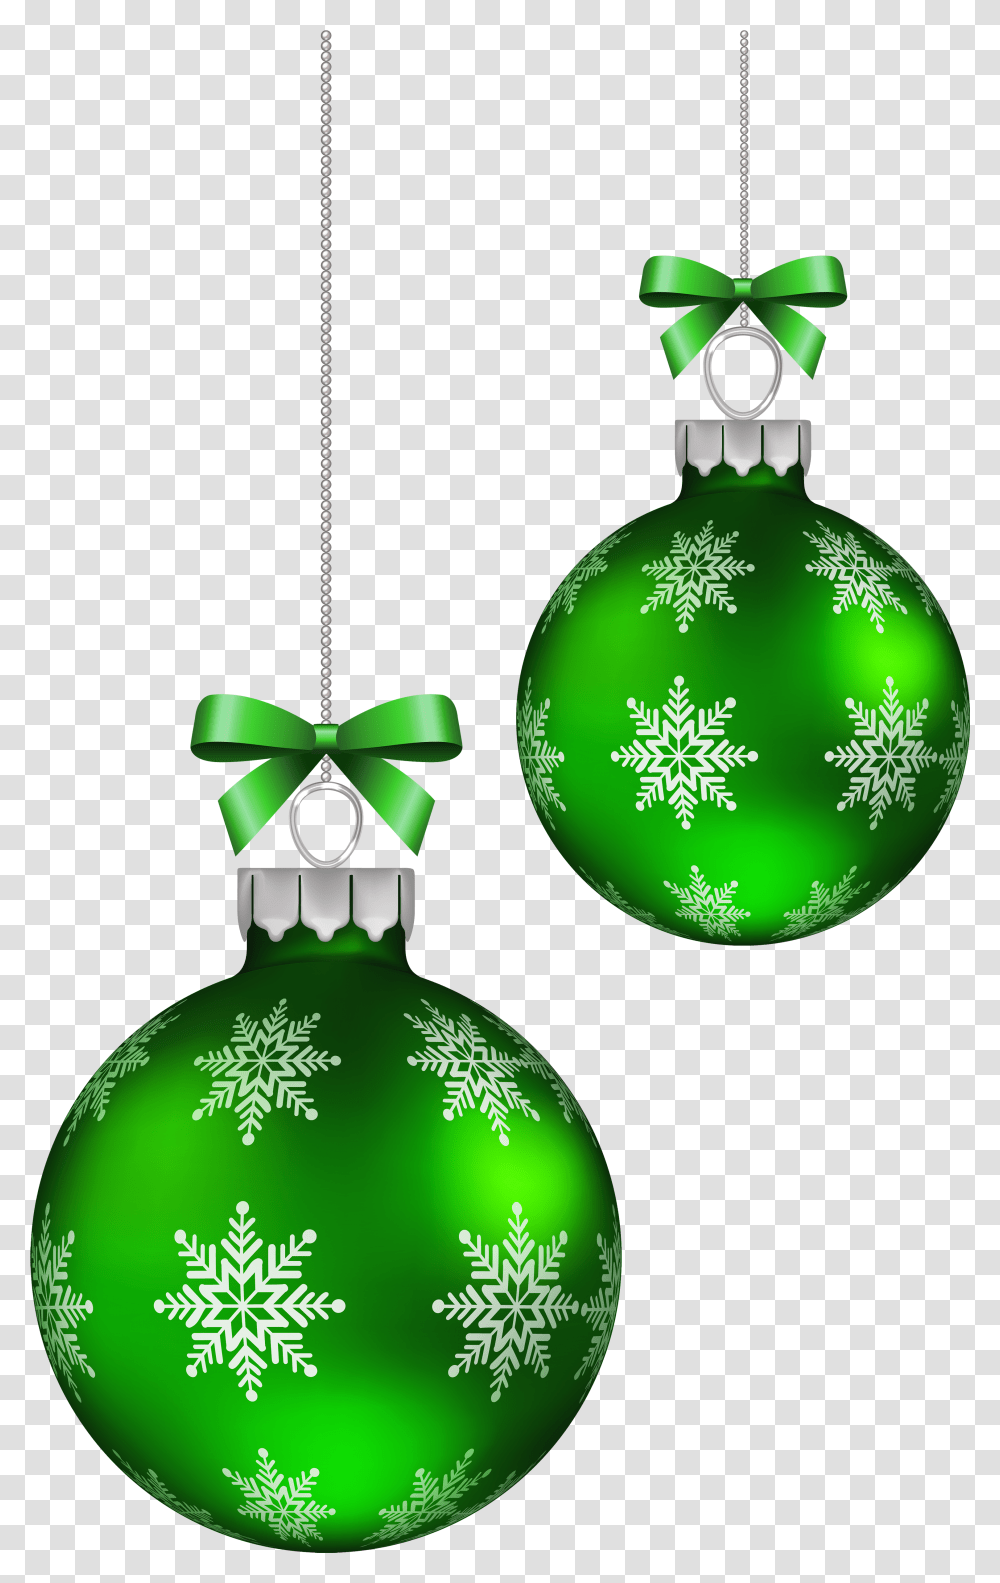 Green Christmas Balls Decoration Clipart Image Christmas Ornaments Background, Emerald, Gemstone, Jewelry, Accessories Transparent Png